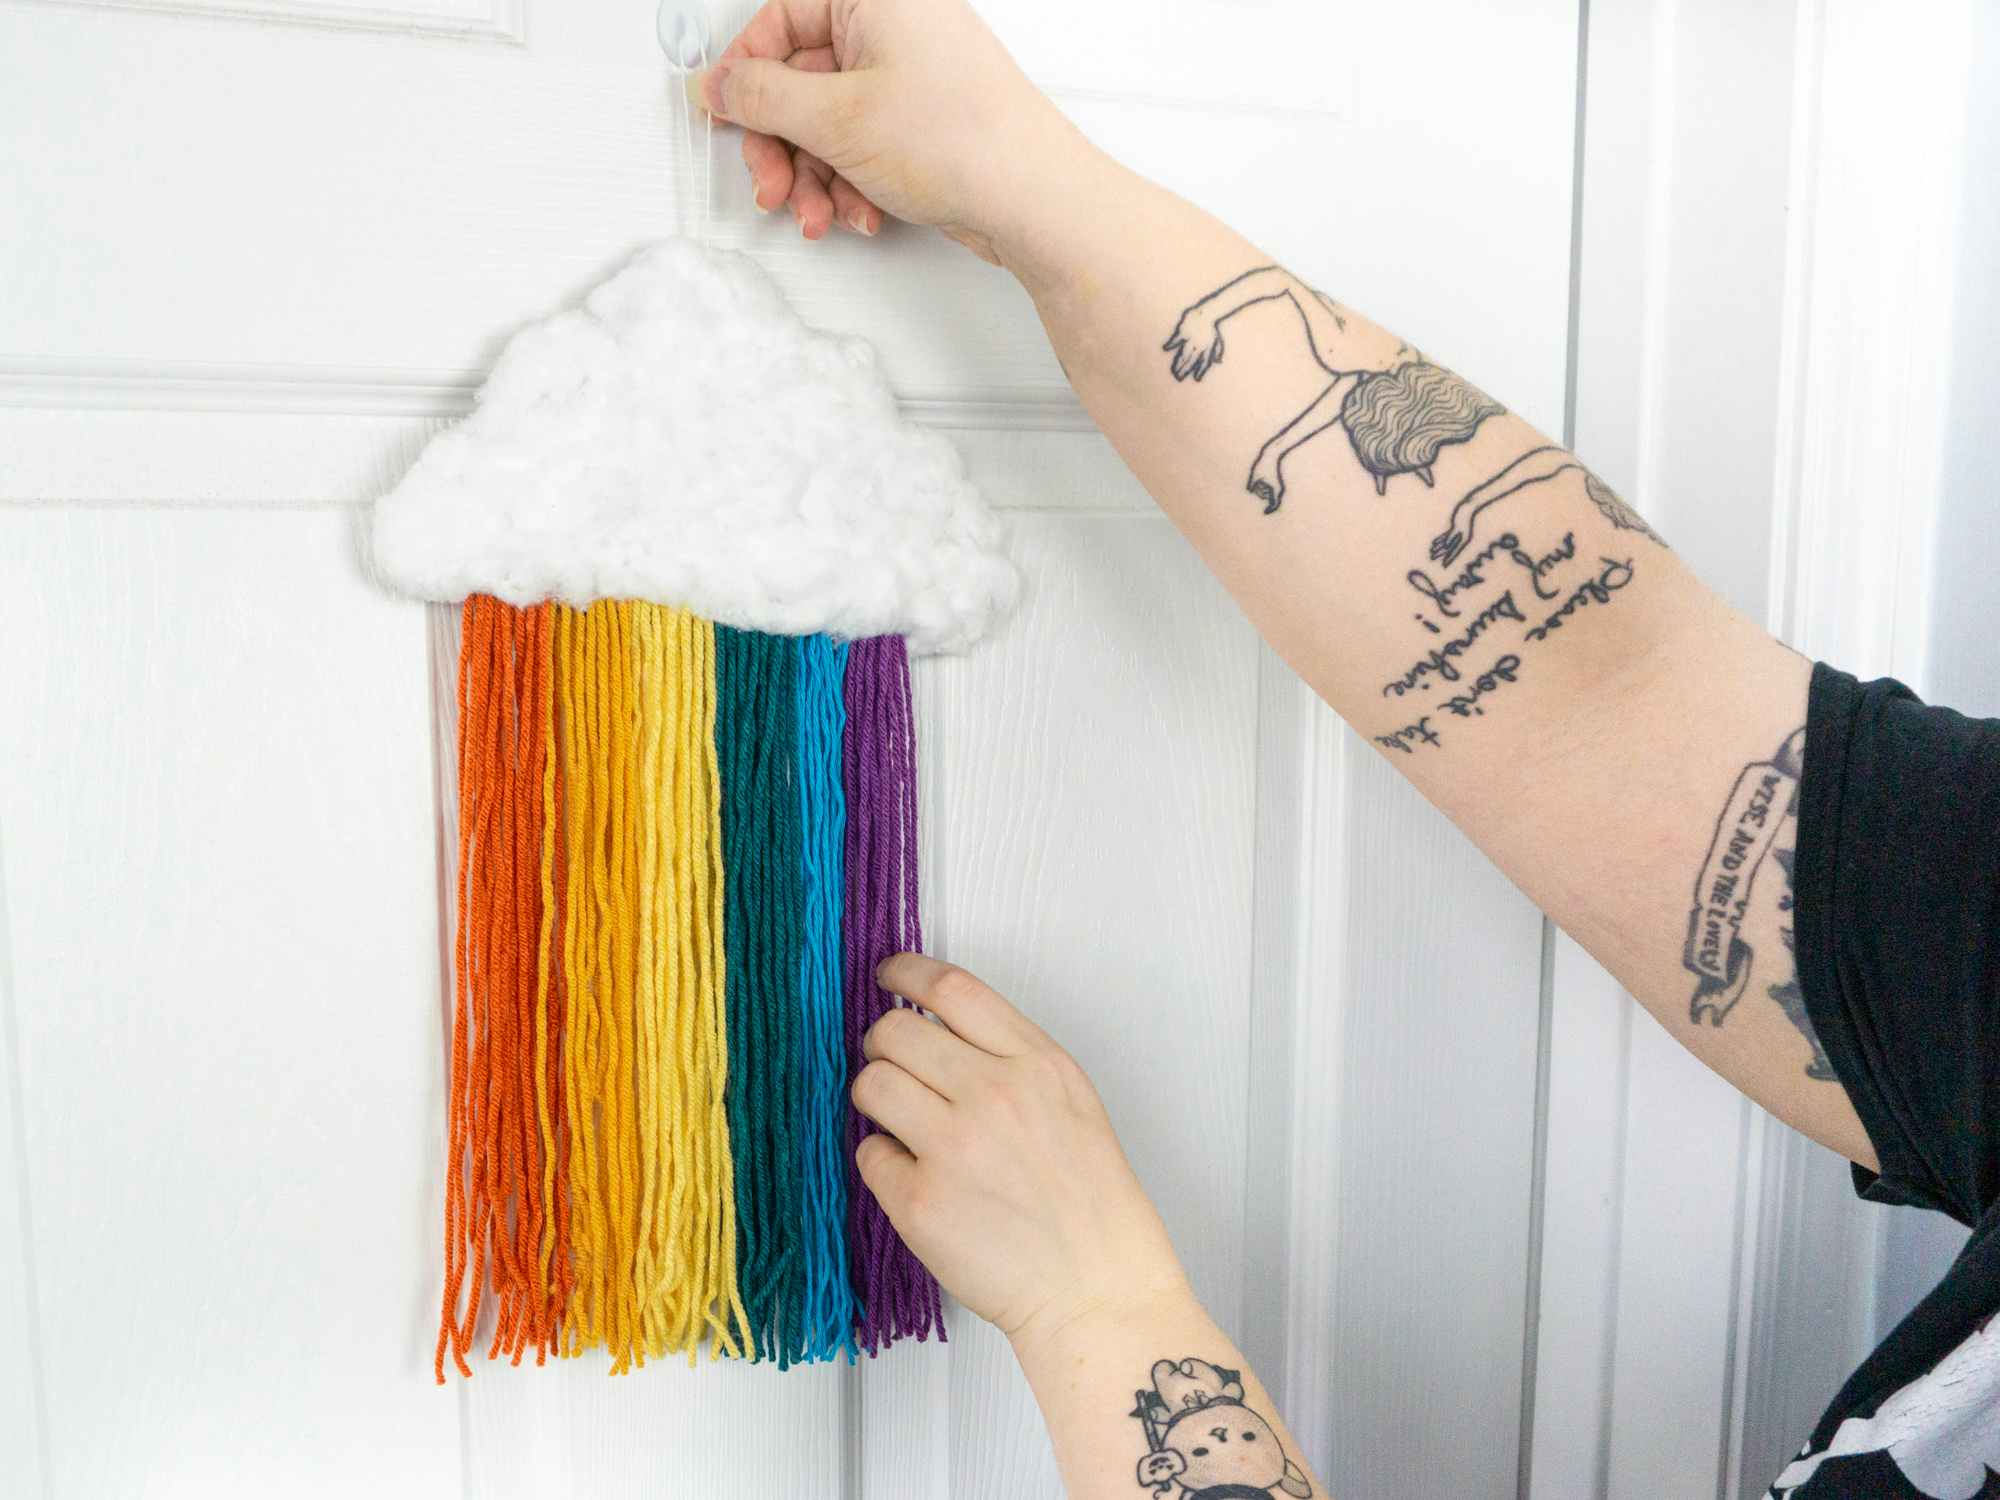 Someone hanging up a completed DIY rainbow cloud decoration